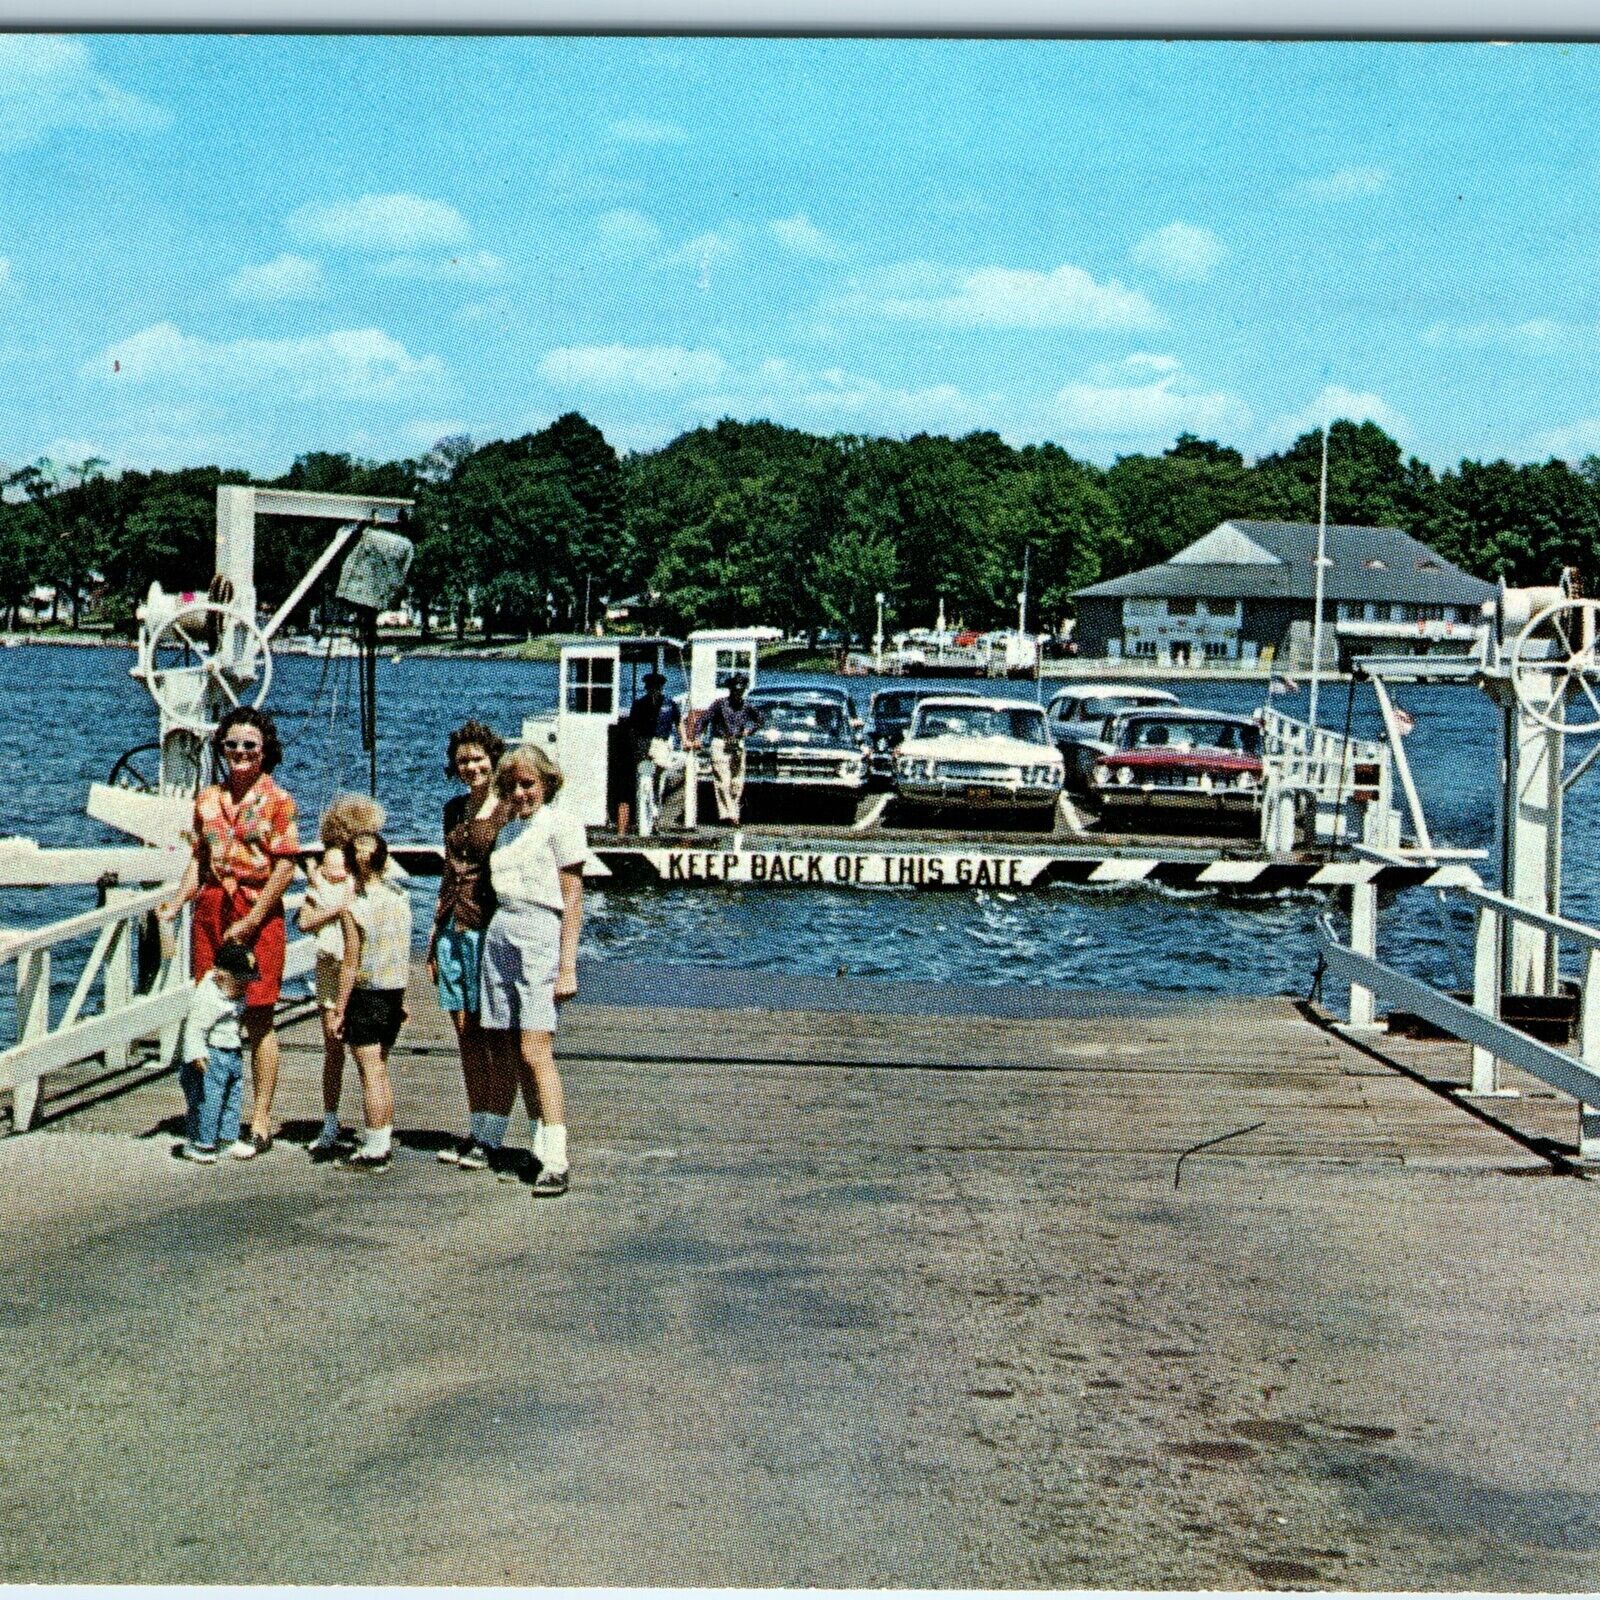 c1960s Stow-Bemus Point, N.Y Ferry on Beautiful Chautauqua Lake Family Cars A221